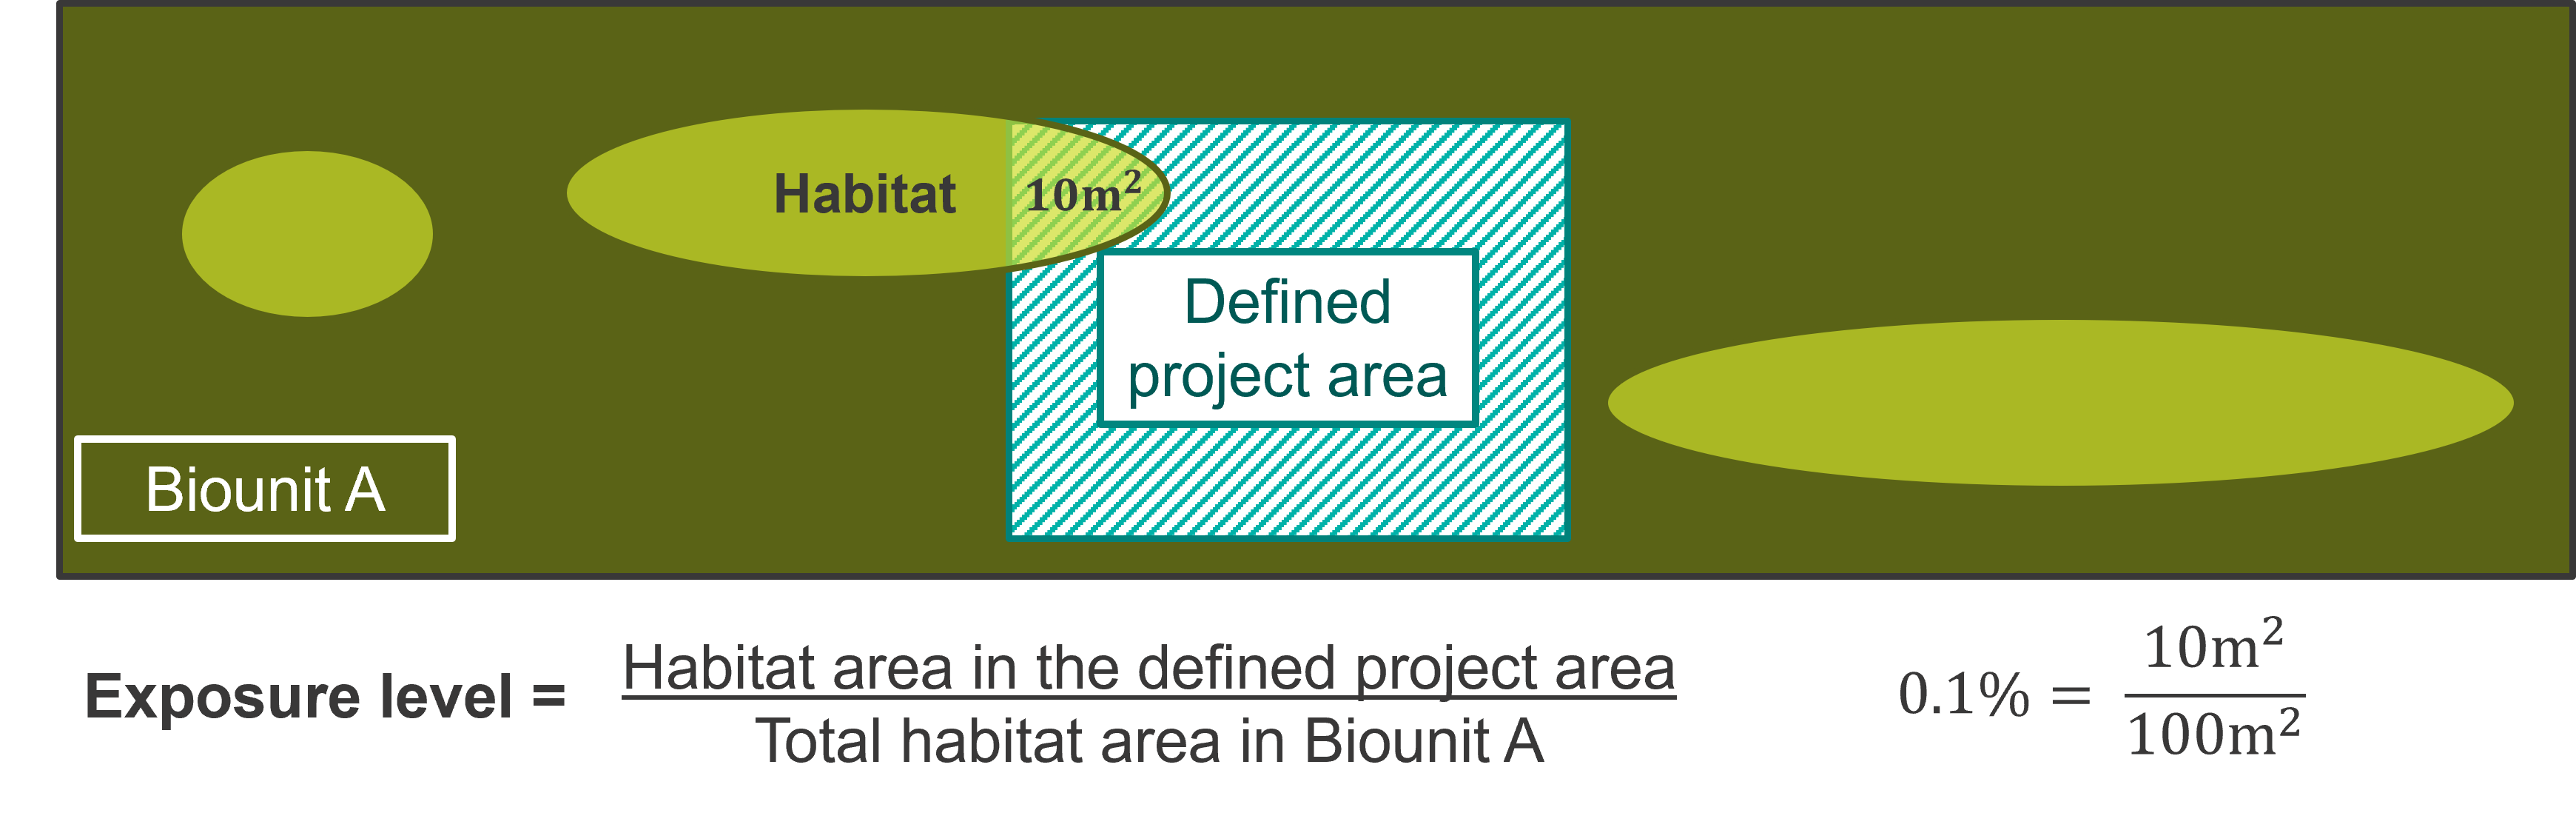 schematic diagram and equation for calculating the exposure level for the habitat per biounit